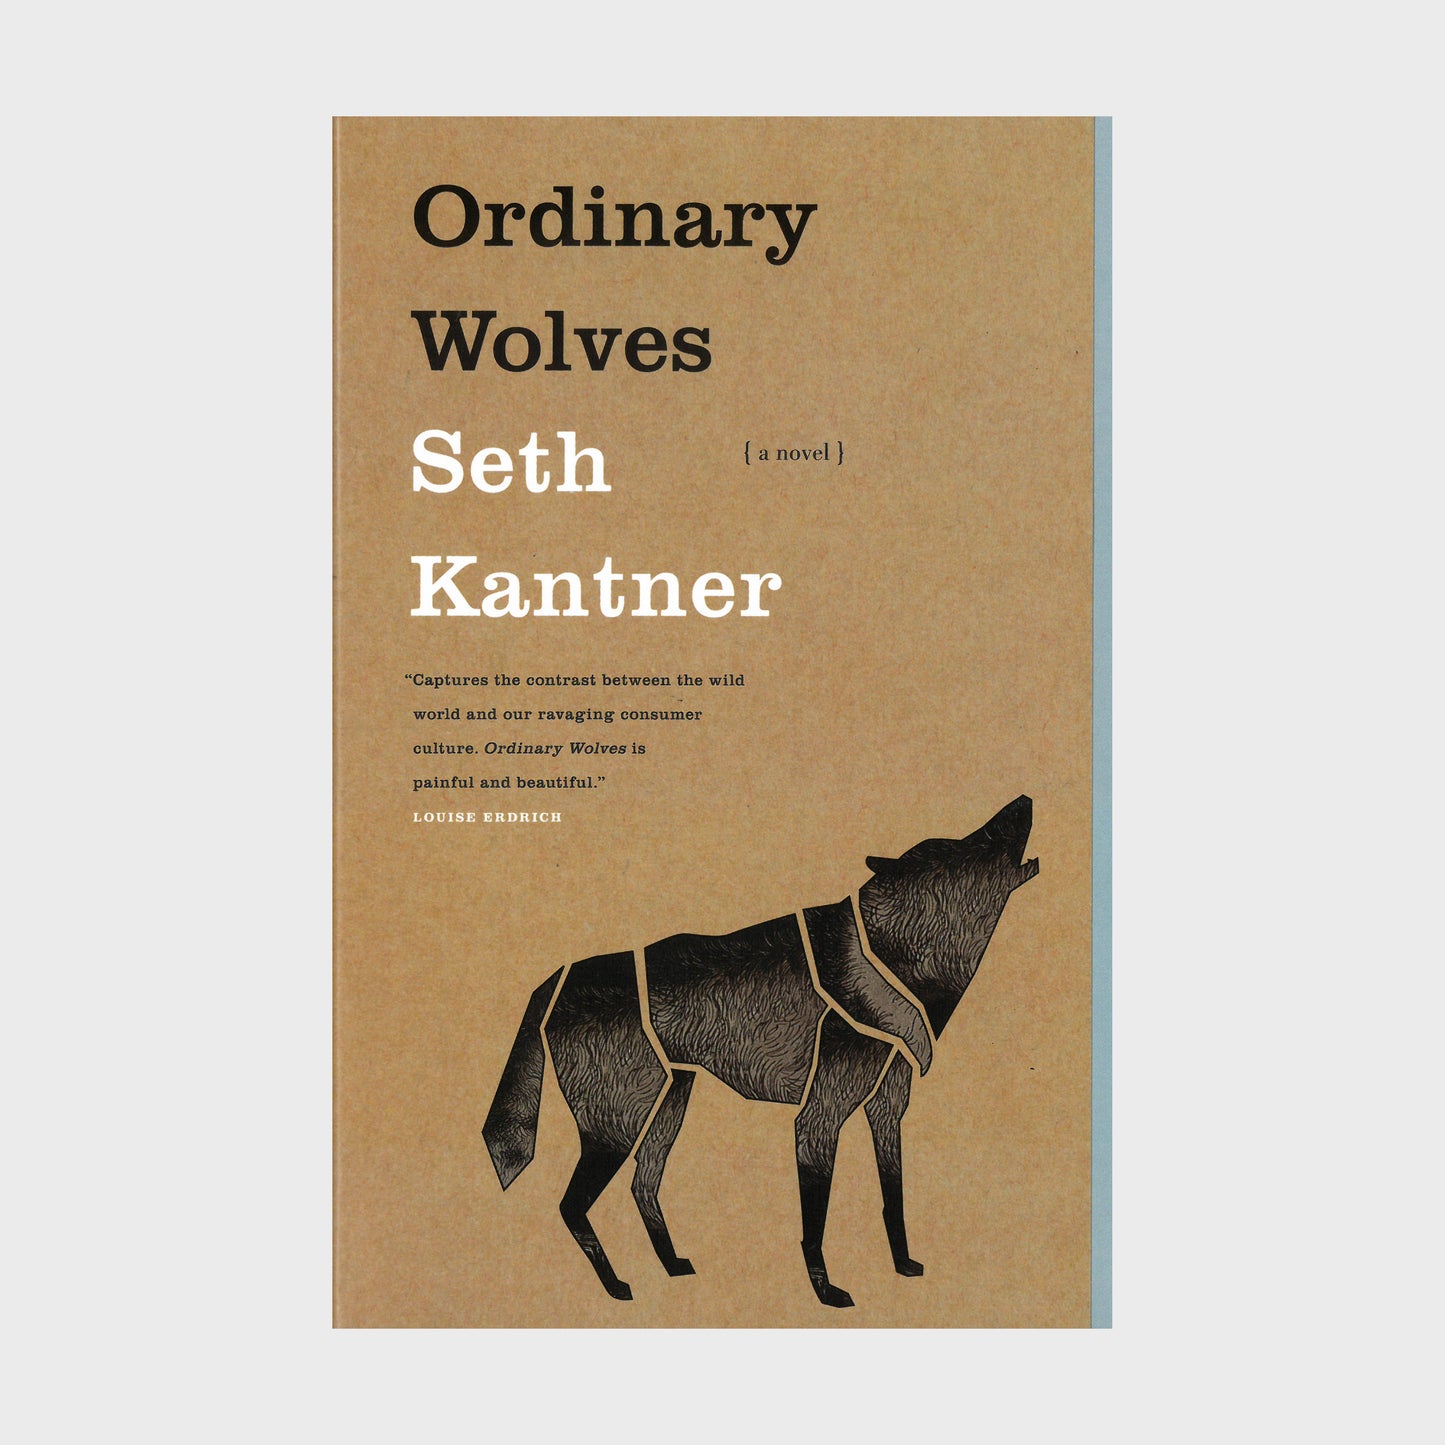 Ordinary Wolves by Seth Kantner - Softcover